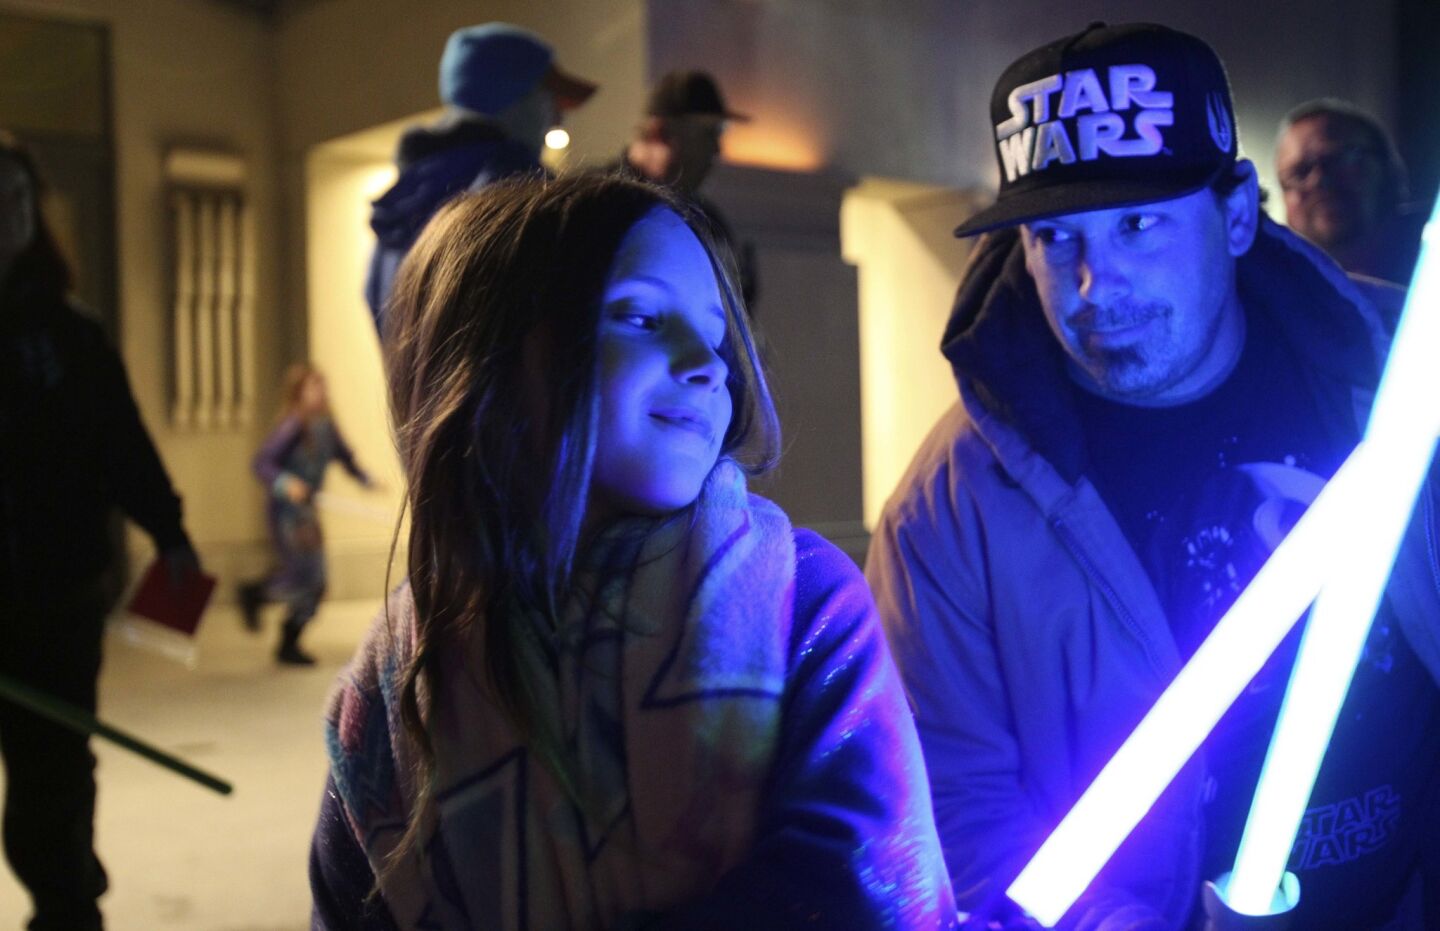 ESCONDIDO, December 30, 2016 | William Piitts, from Poway, and daughter Triniti, 10, hold their lightsabers as they and other Star Wars fans gather at the California Center for the Arts in Escondido to pay tribute to actress Carrie Fisher on Friday | Photo by Hayne Palmour IV/San Diego Union-Tribune/Mandatory Credit: HAYNE PALMOUR IV/SAN DIEGO UNION-TRIBUNE/ZUMA PRESS San Diego Union-Tribune Photo by Hayne Palmour IV copyright 2016